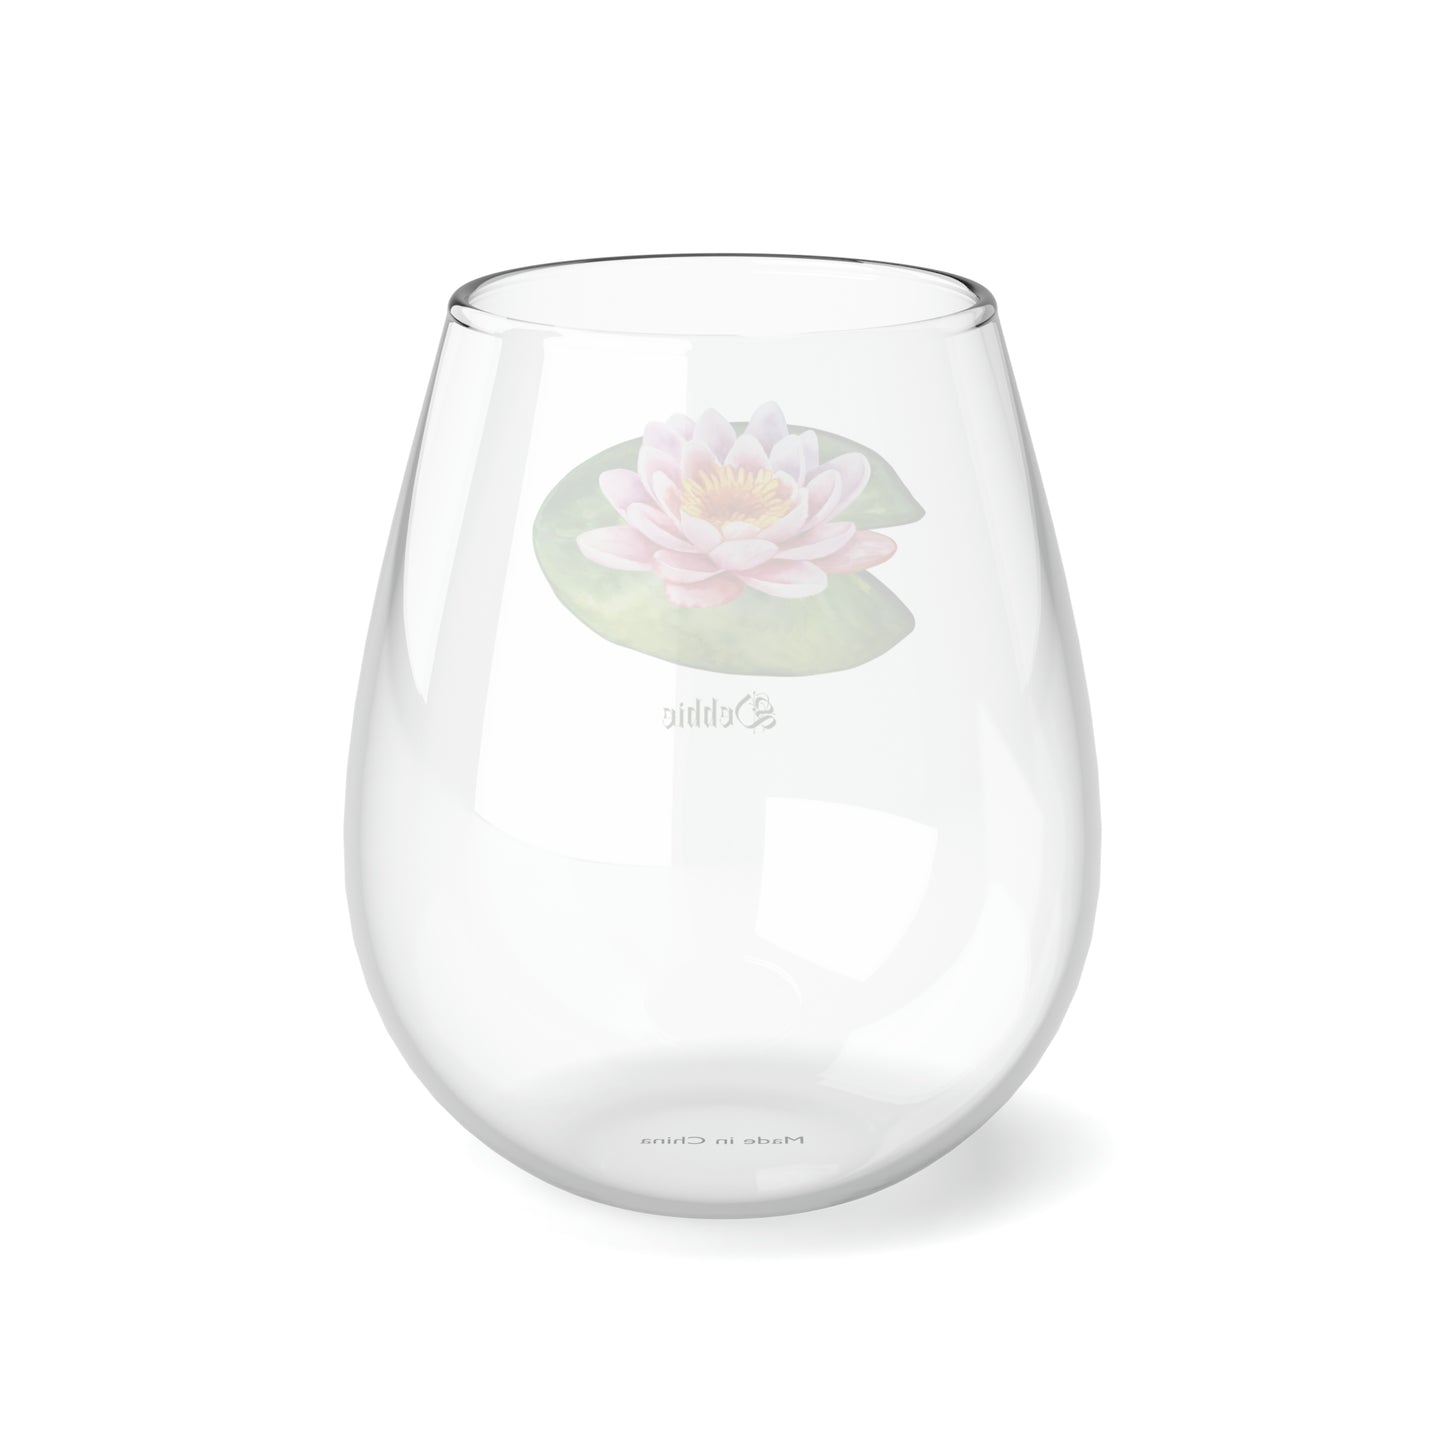 July PERSONALIZED Birth Flower Wine Glass, Birth Flower Gifts, Birth Flower wine glass, Birth Flower Gifts for Women, Gift for coworker, sister gift, birthday gift, Valentine gift, Stemless Wine Glass, 11.75oz